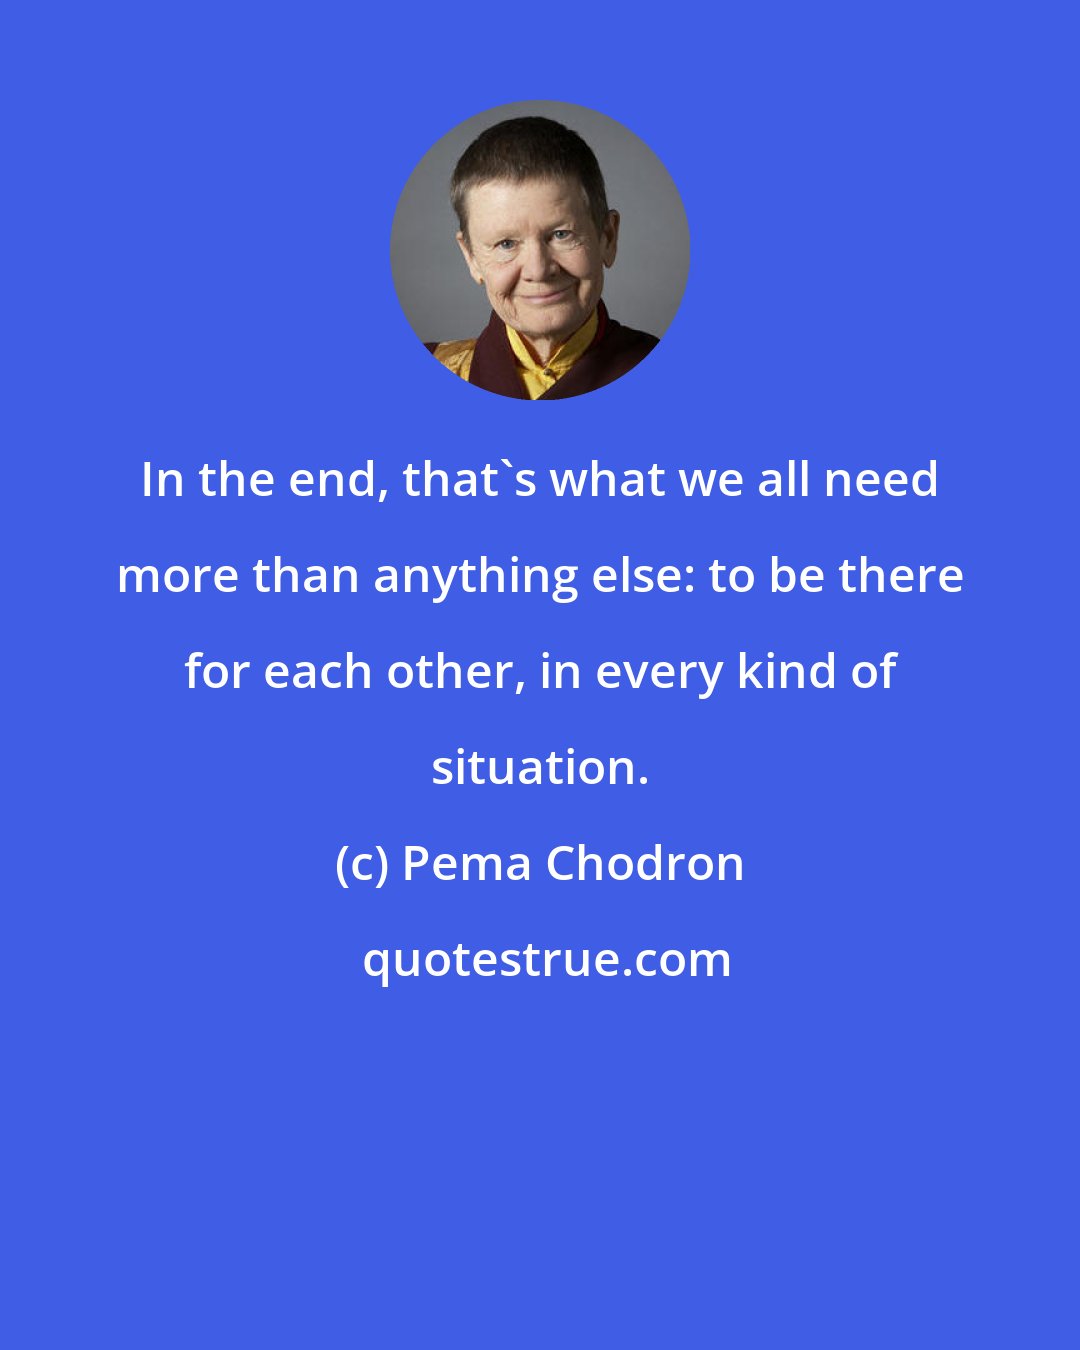 Pema Chodron: In the end, that's what we all need more than anything else: to be there for each other, in every kind of situation.